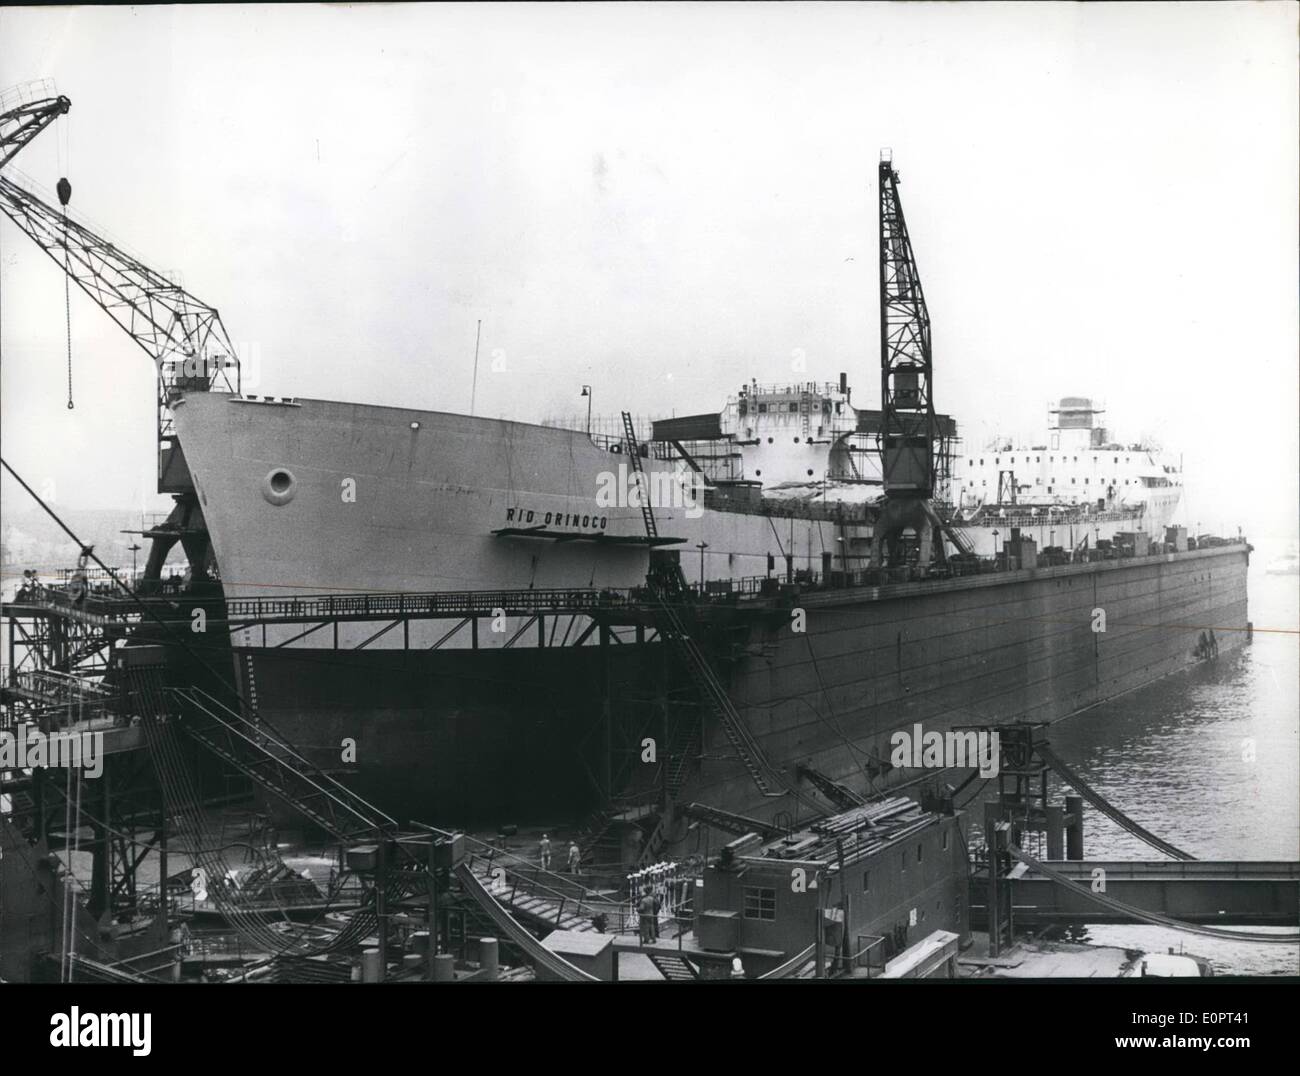 Feb. 02, 1957 - The greatest ship that is built , now in Germany is destined for the US. RIO Orinoco is the name of the 24500 to one freighter that shall be released to a shipping office in Los Angeles. Stock Photo